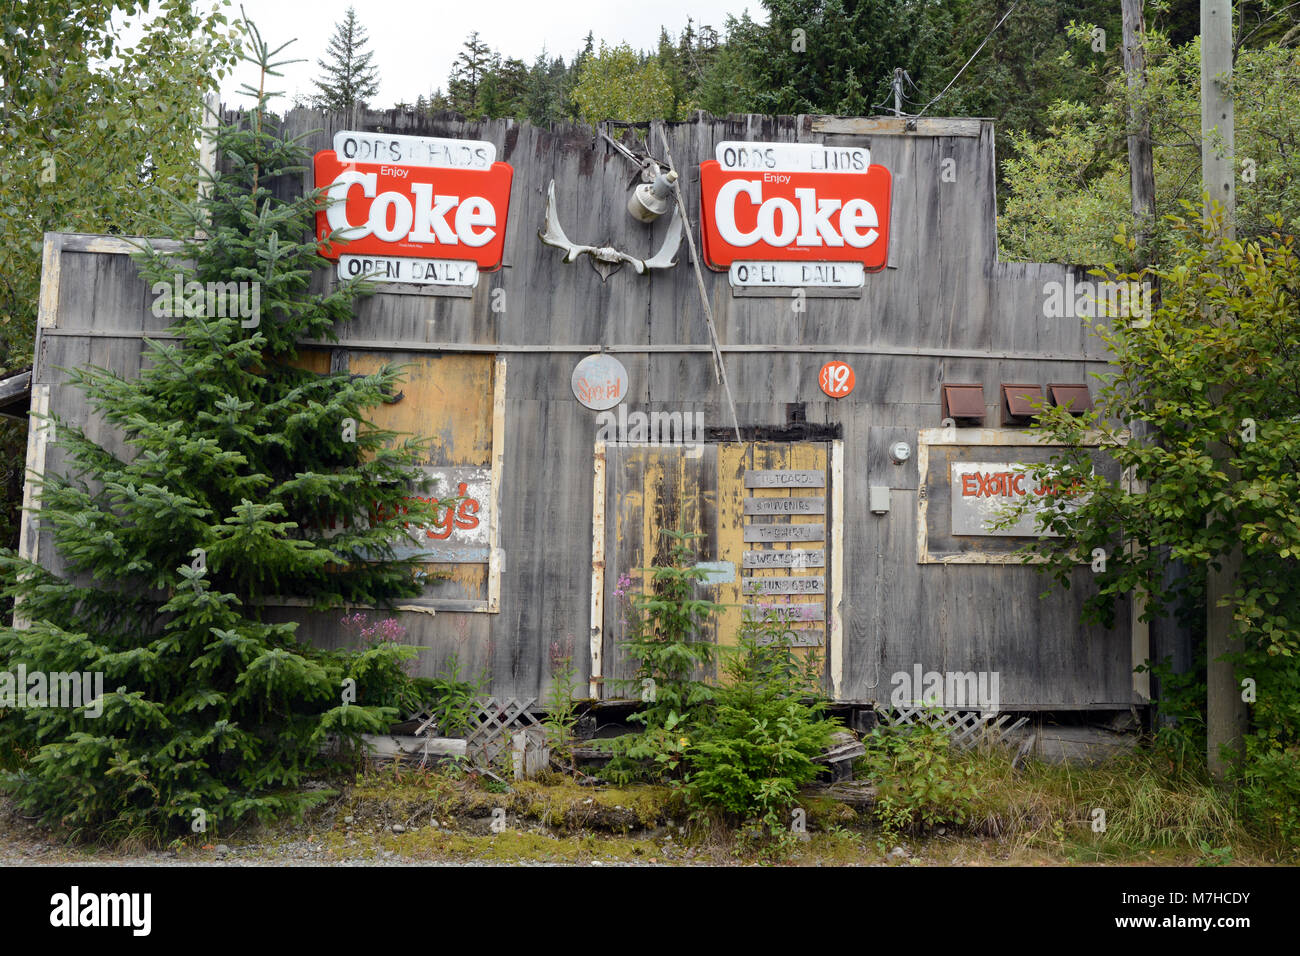 The exterior of an old abandoned and run down building in the historical mining town of Hyder, Alaska, United States. Stock Photo